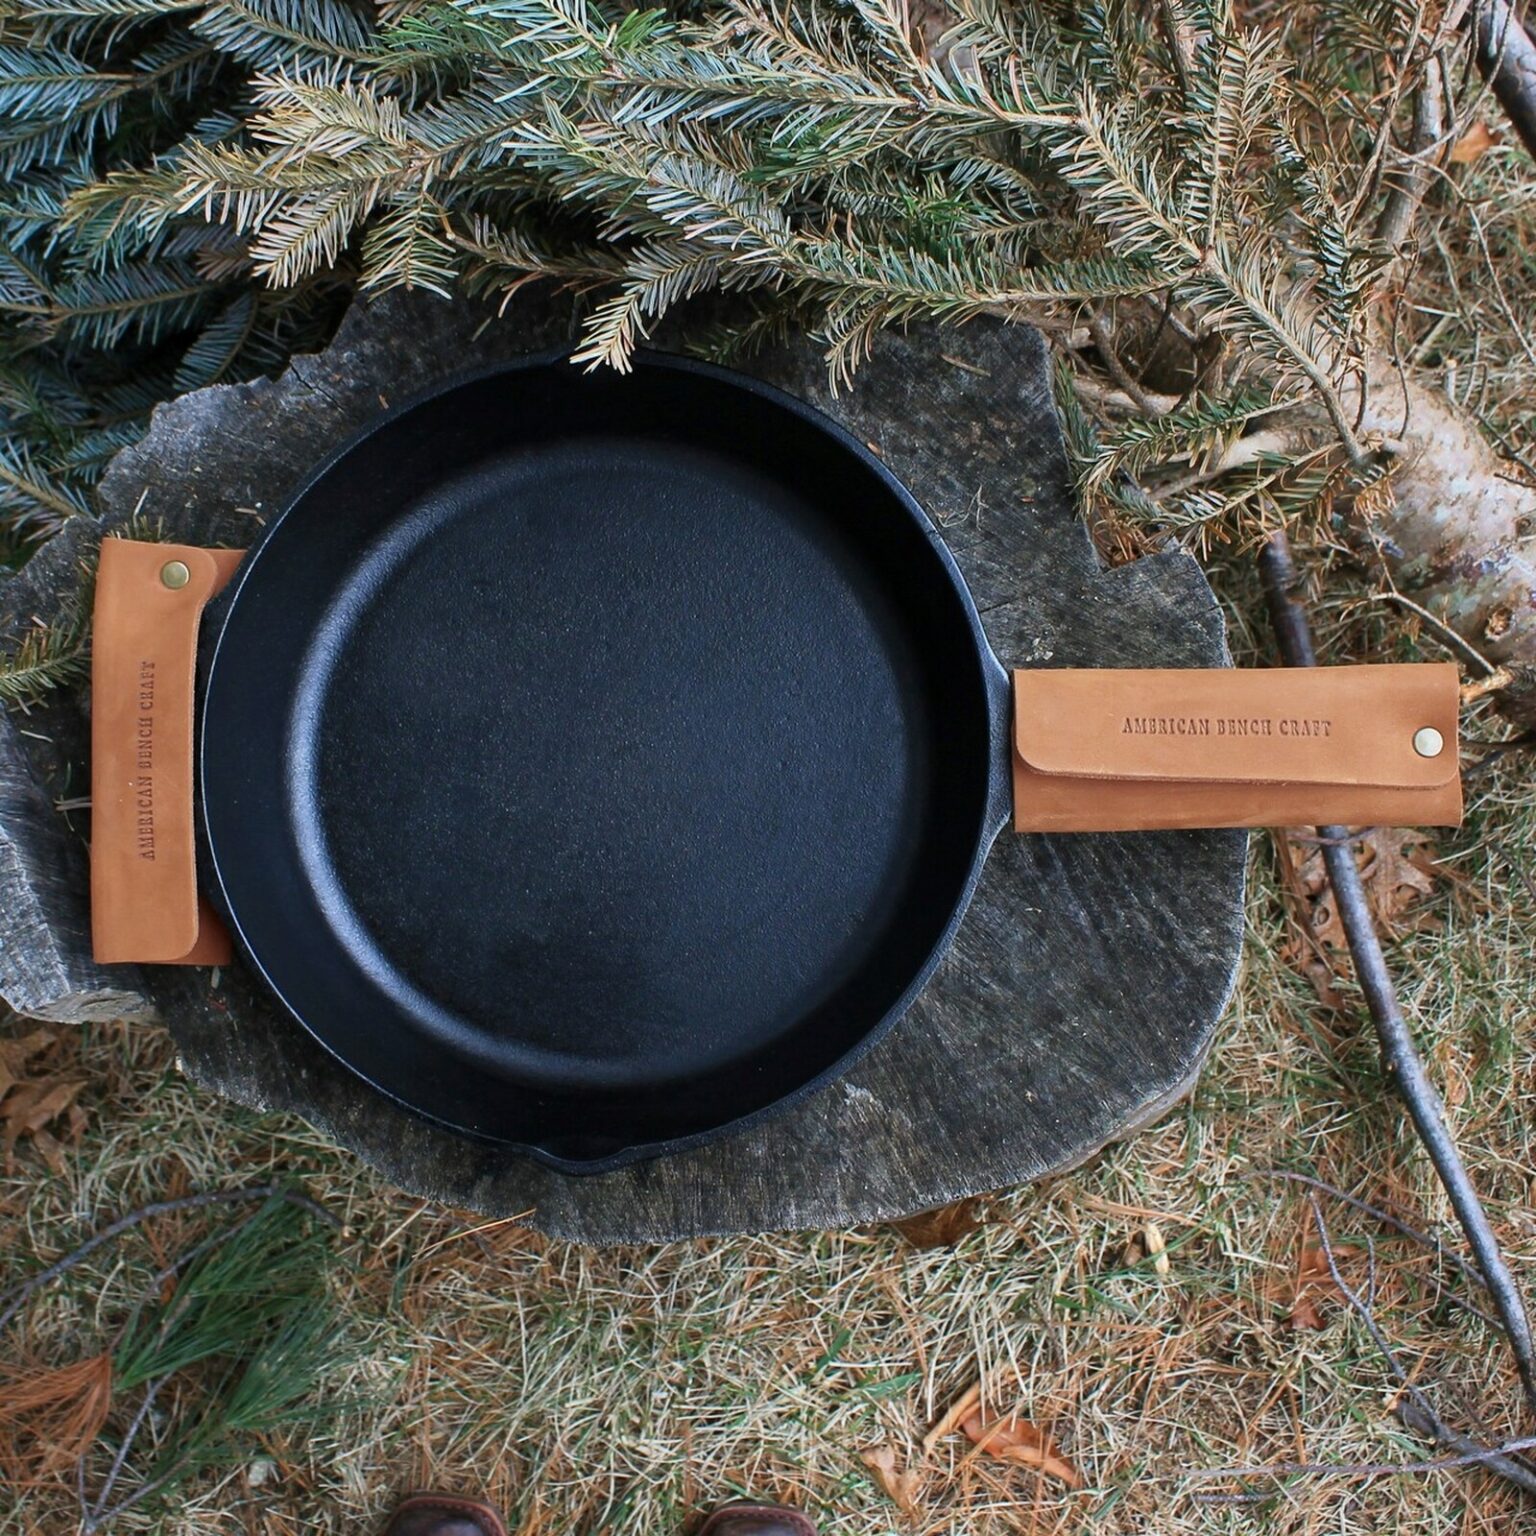 leather handle covers for cast iron skillet